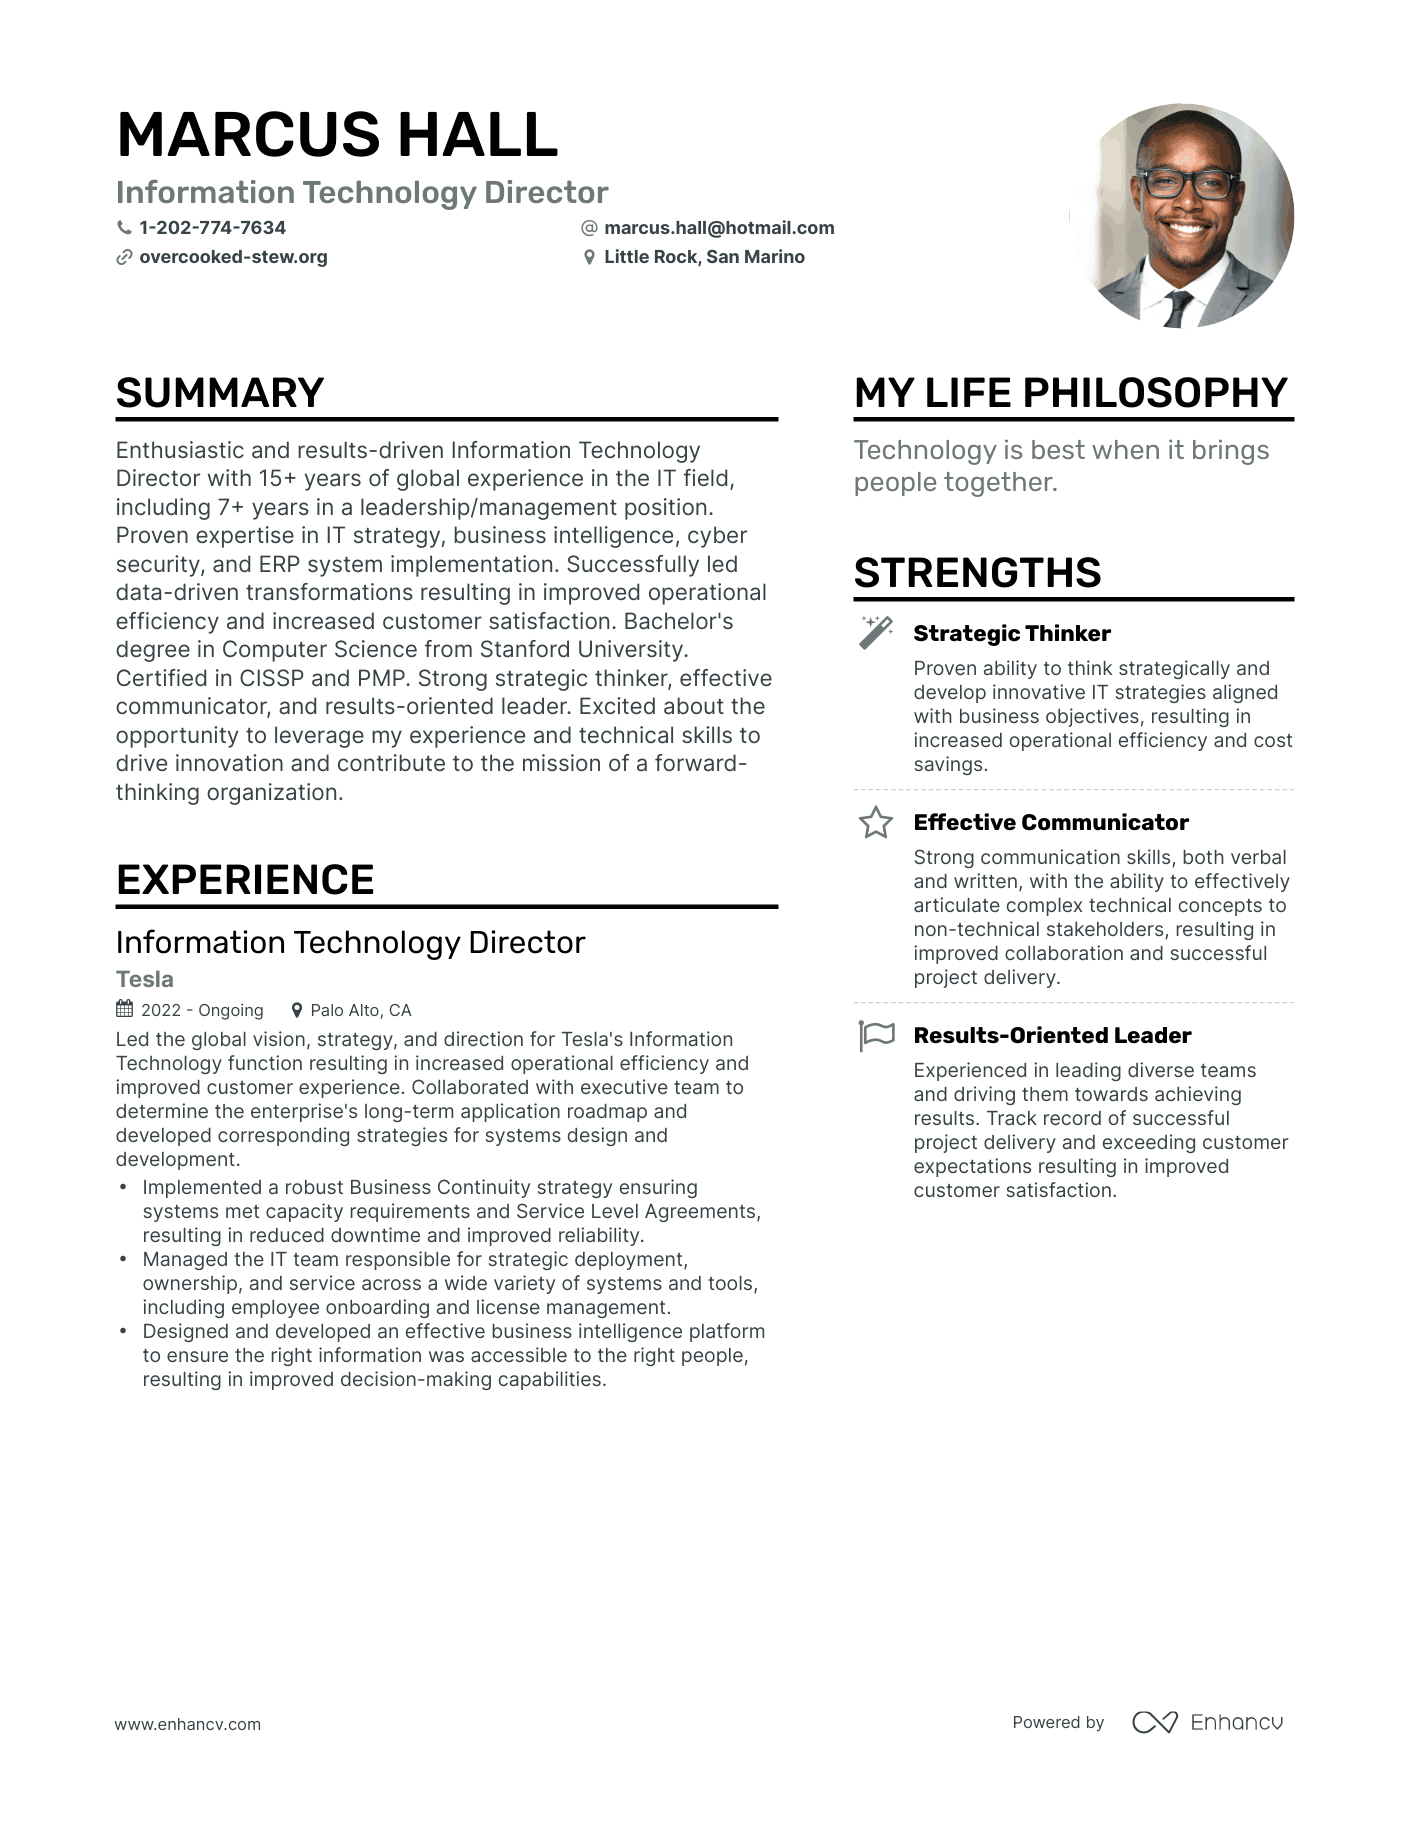 Information Technology Director resume example